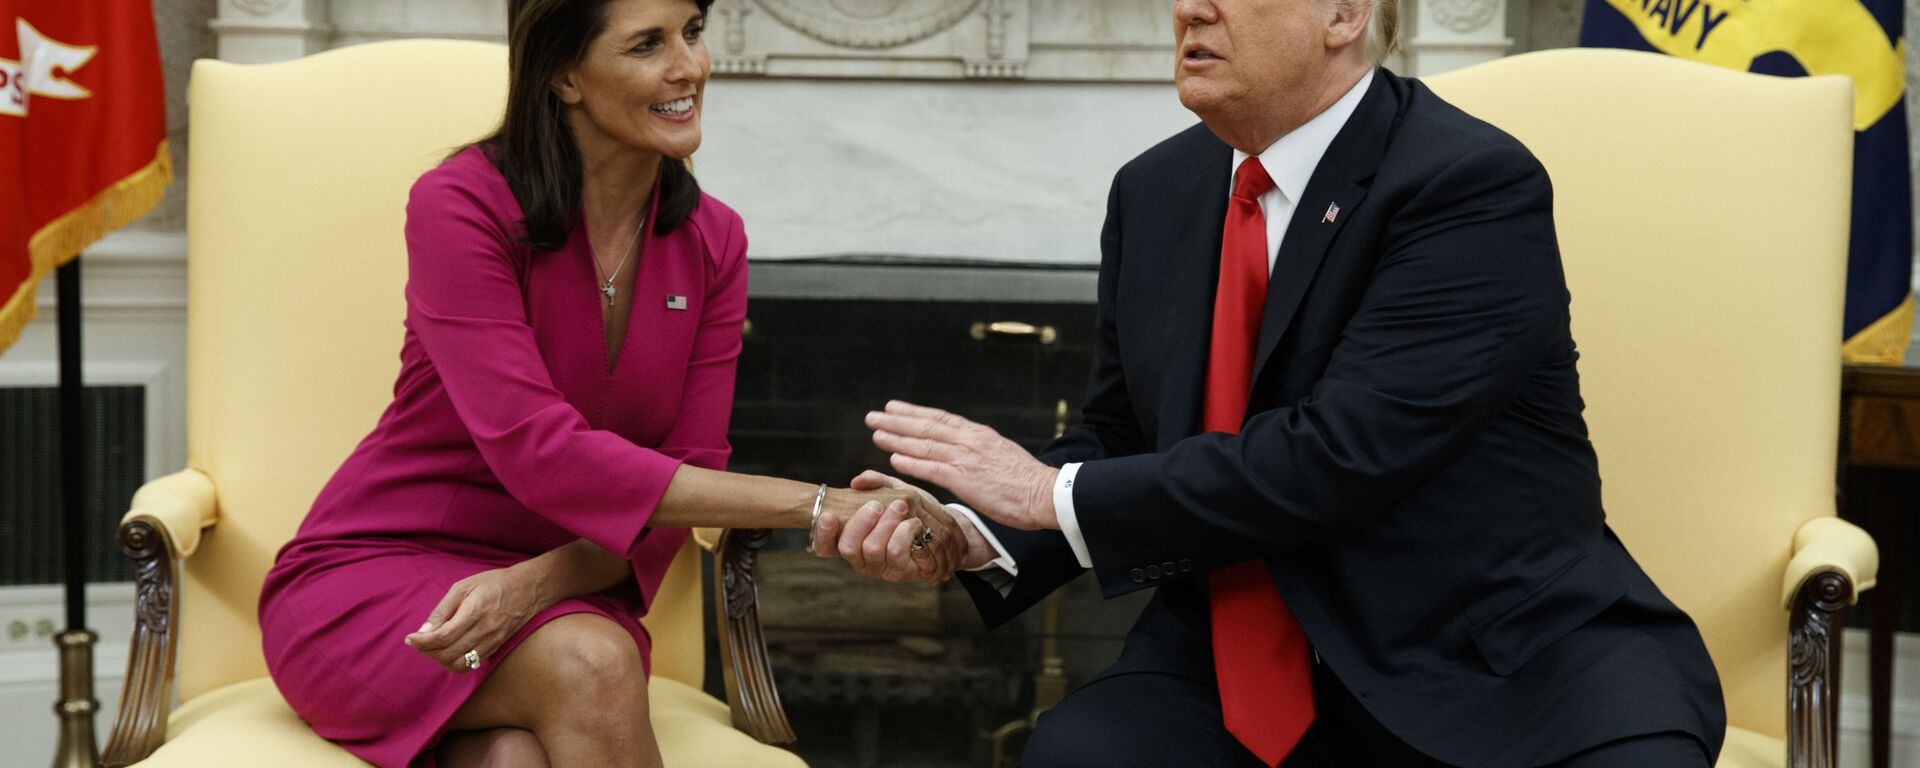 President Donald Trump meets with outgoing U.S. Ambassador to the United Nations Nikki Haley in the Oval Office of the White House, Tuesday, Oct. 9, 2018, in Washington - Sputnik International, 1920, 14.01.2021